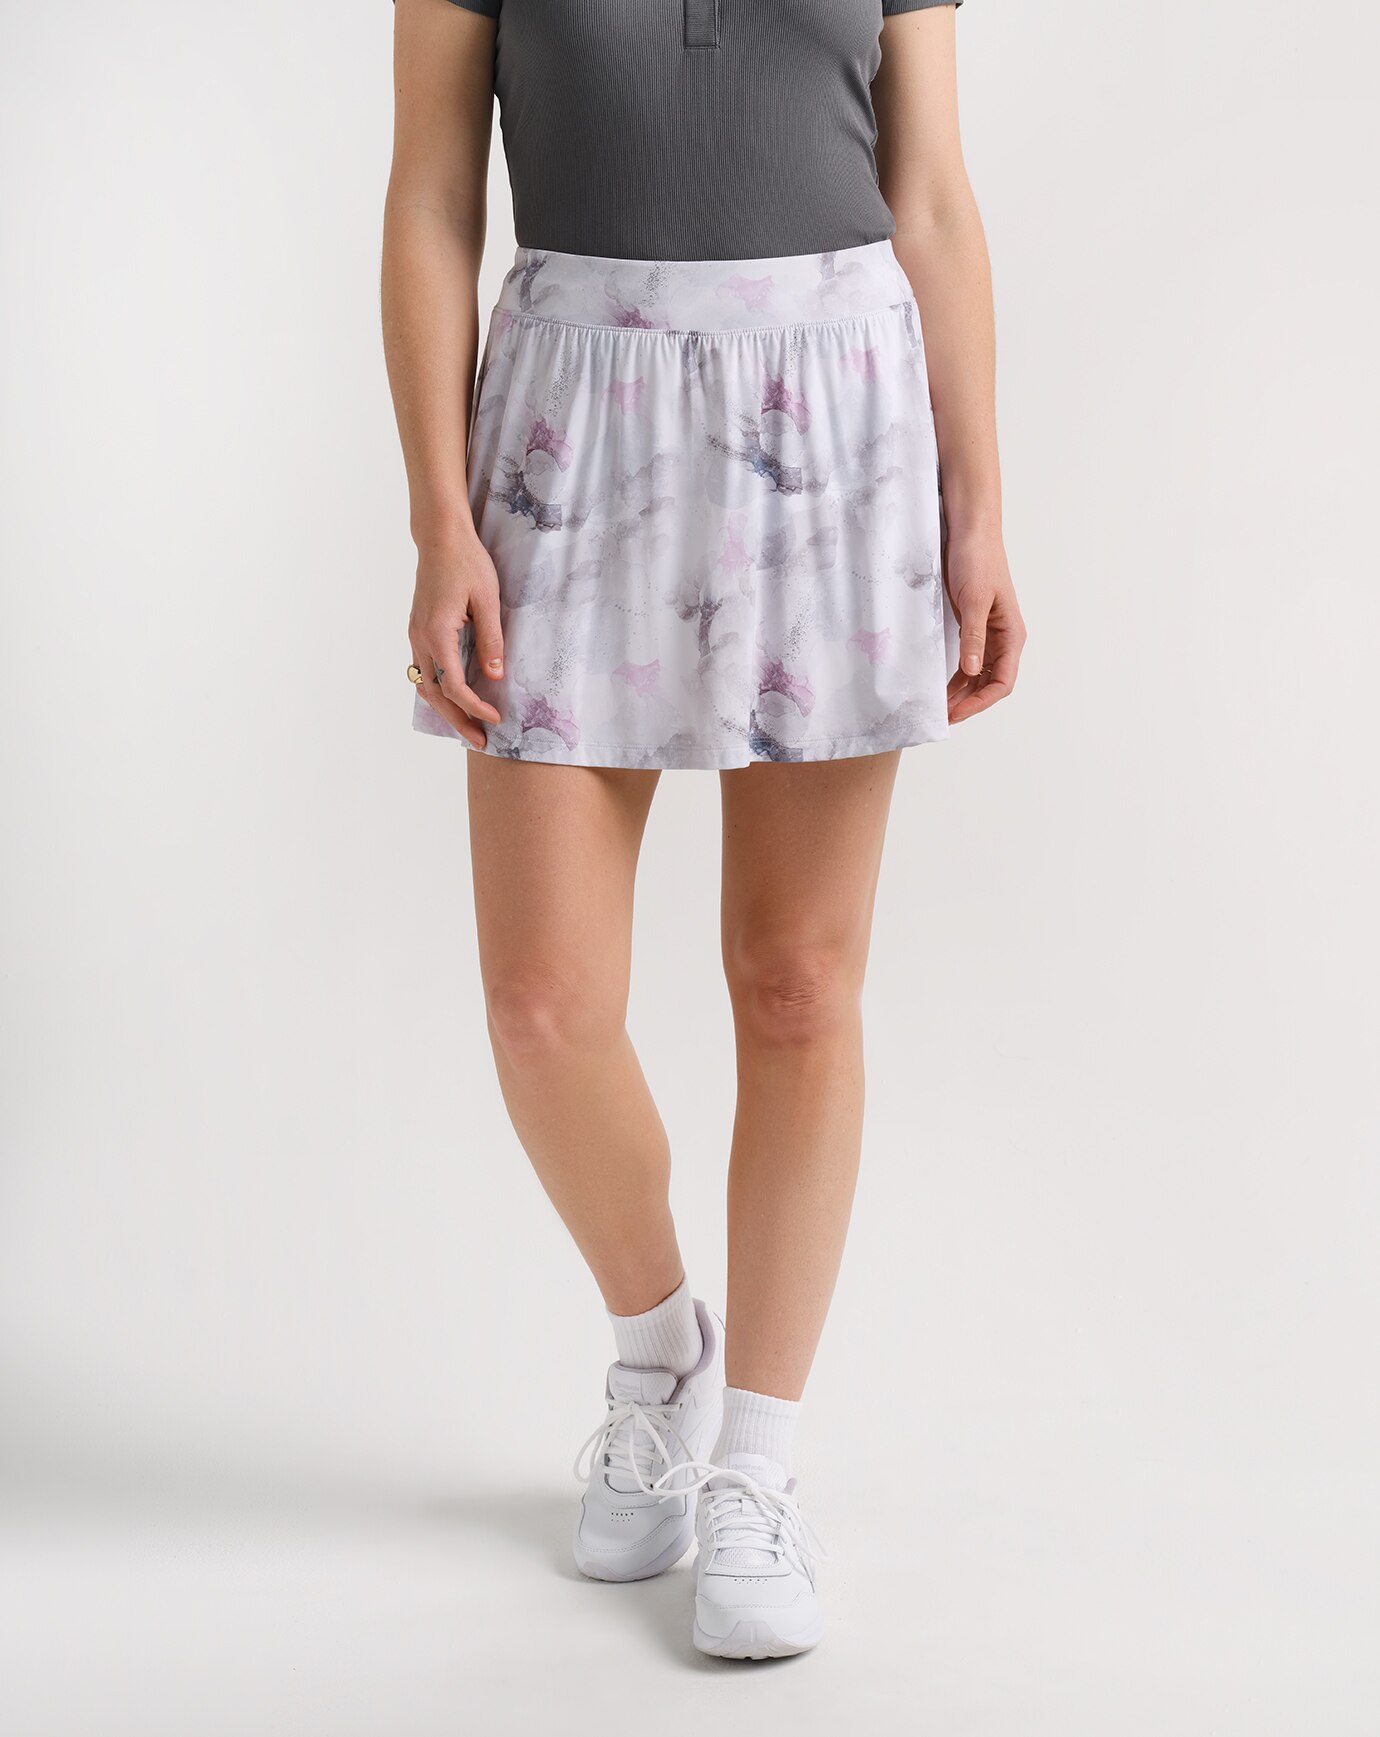 We're Digging This New Line Of Tennis Gear lululemon Just Dropped